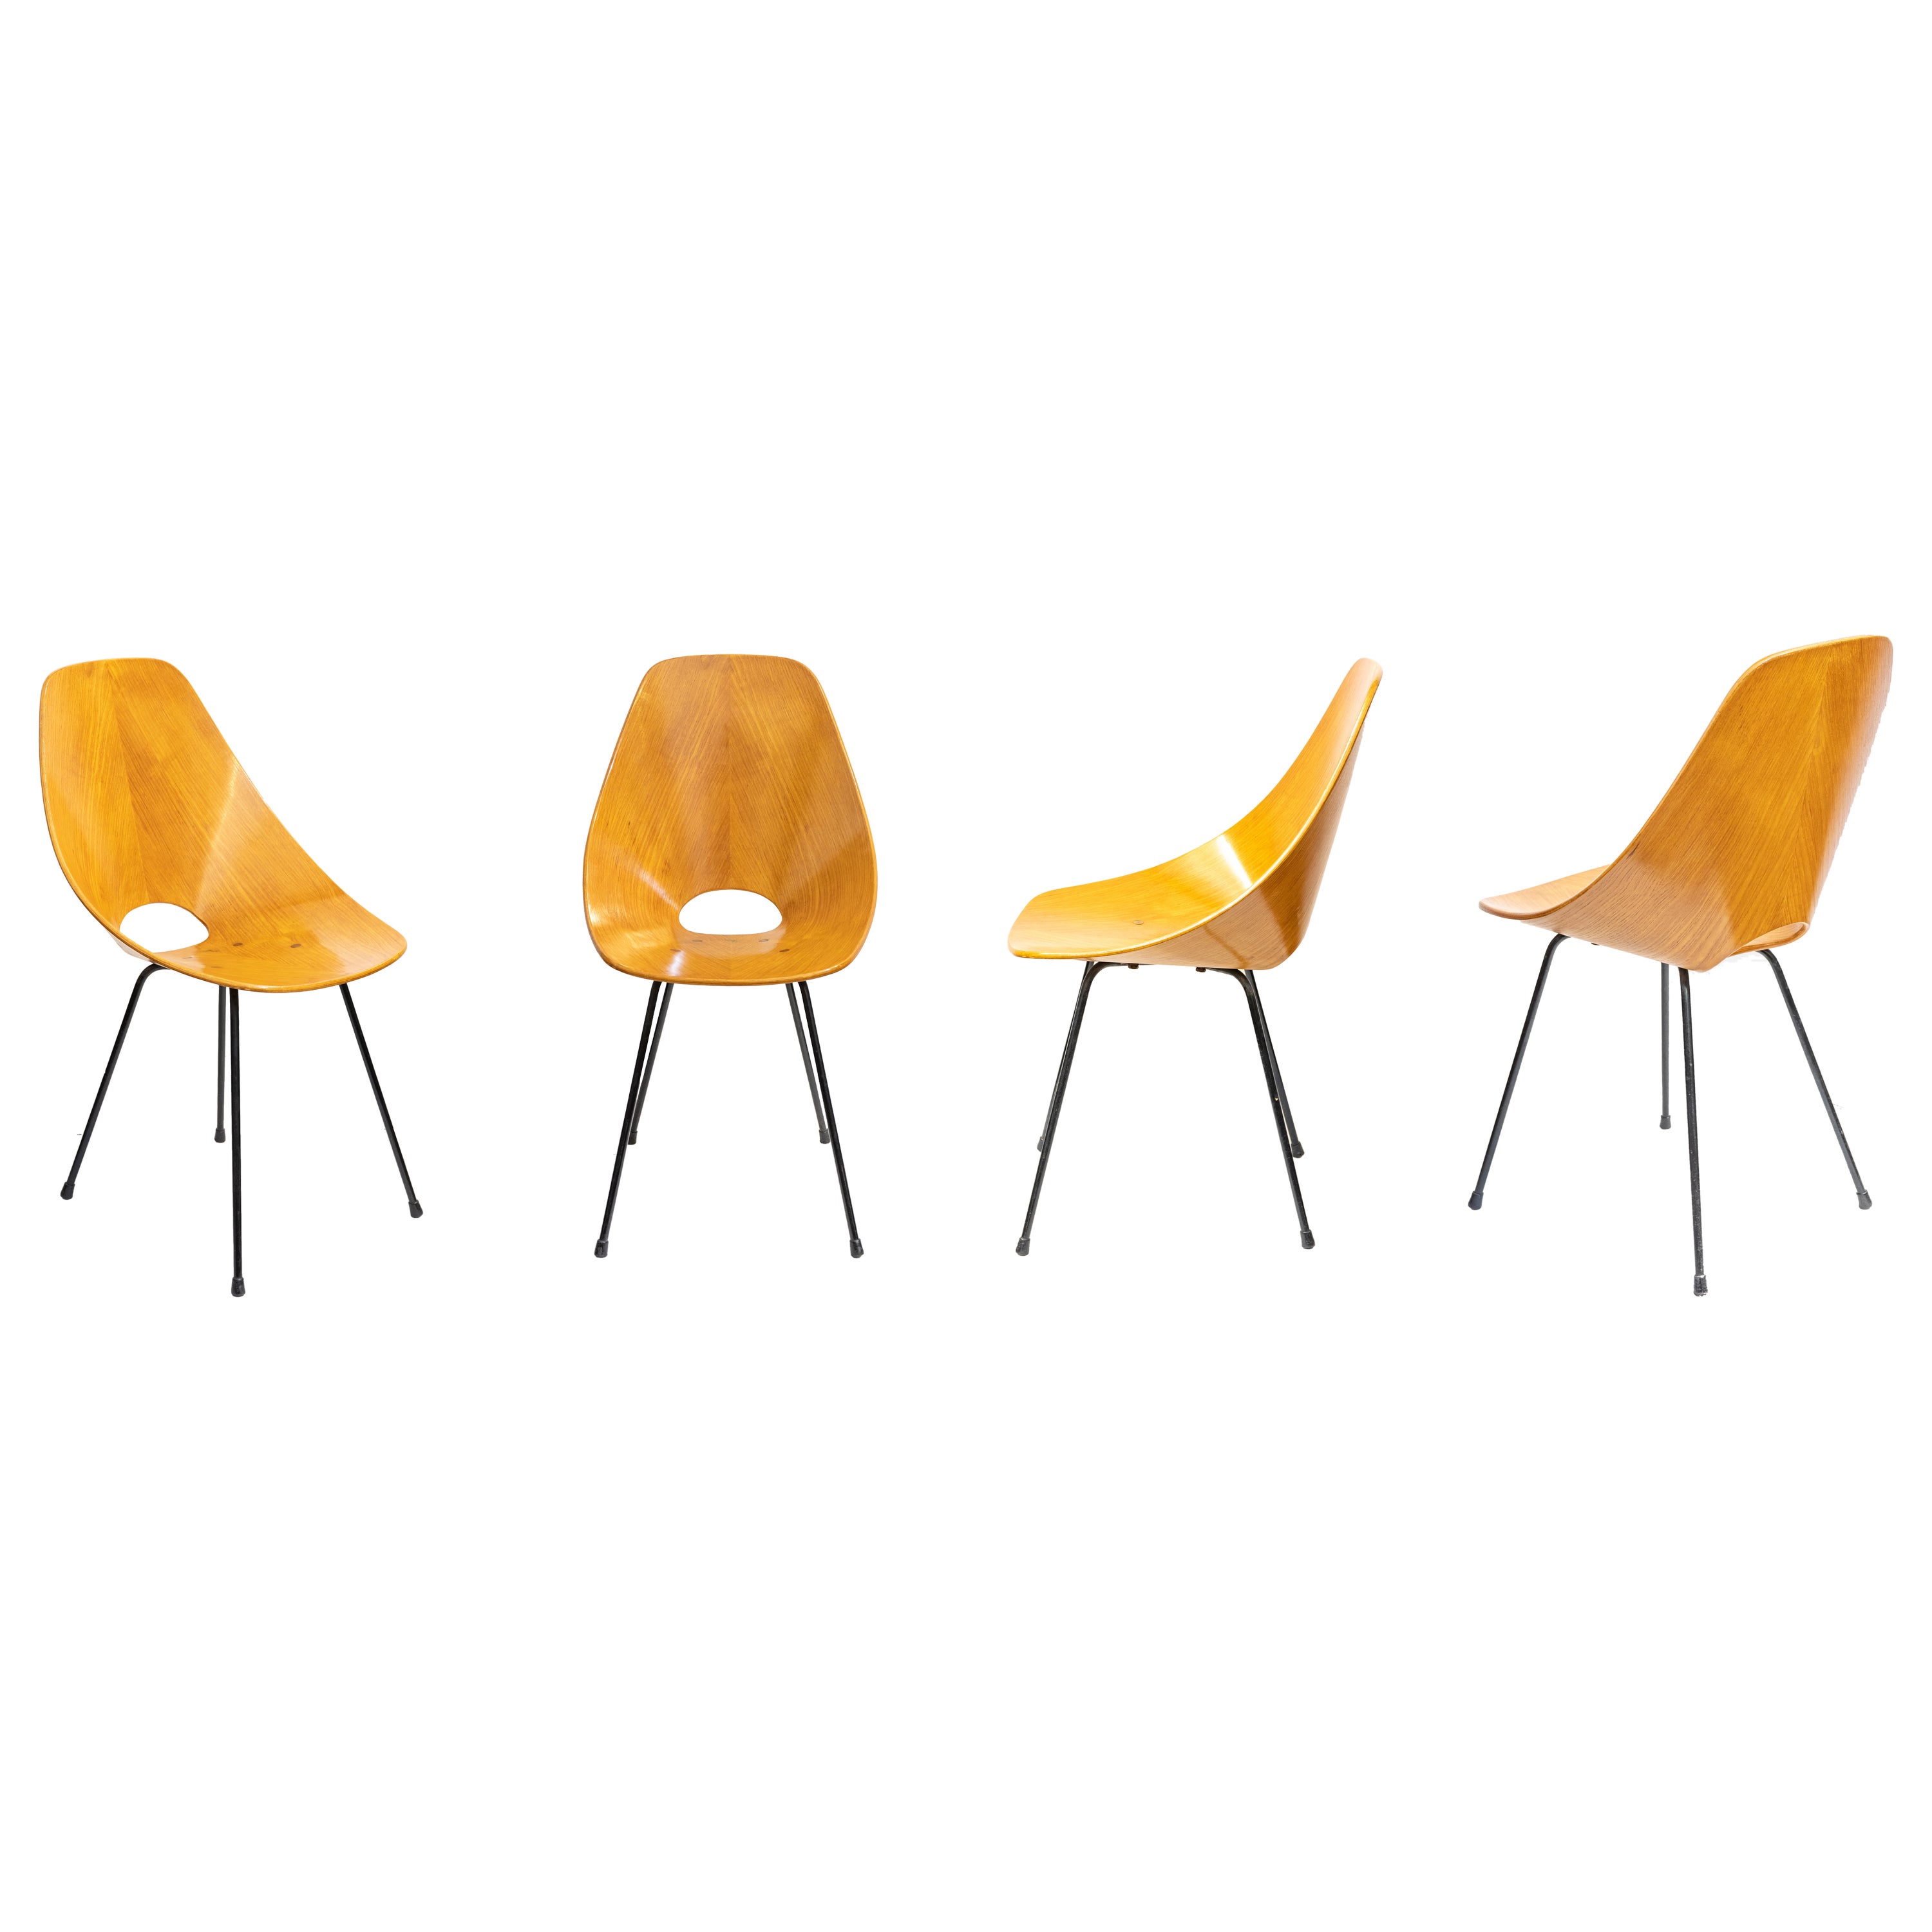 Set of Four "Medea" Chairs by Vittorio Nobili, Italy, 1955 For Sale